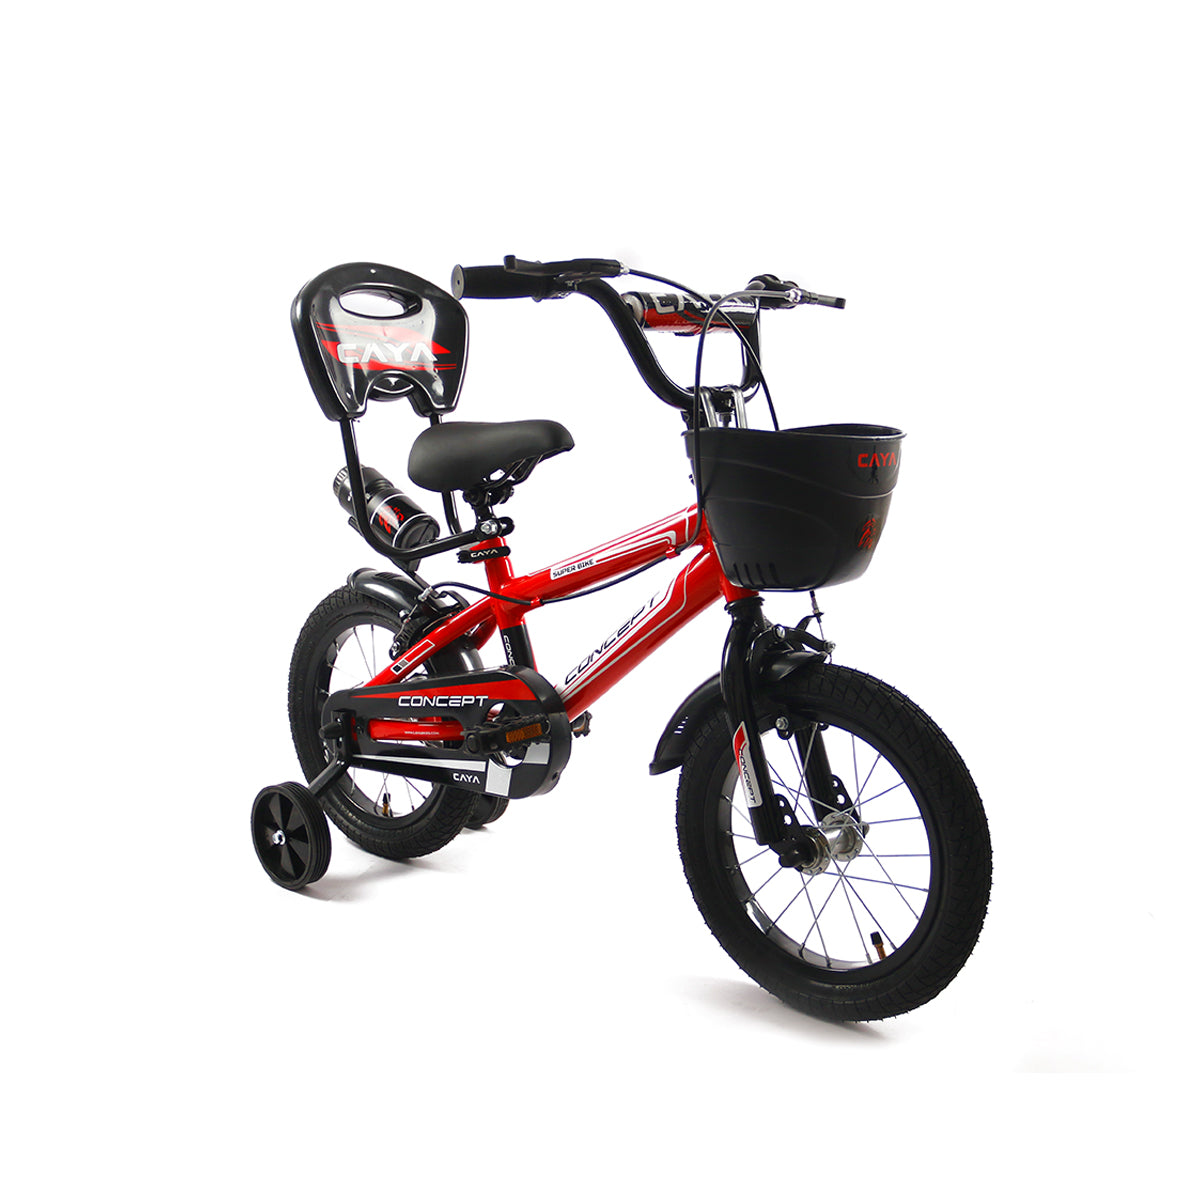 Caya Concept 14 Bicycle for Unisex Kids